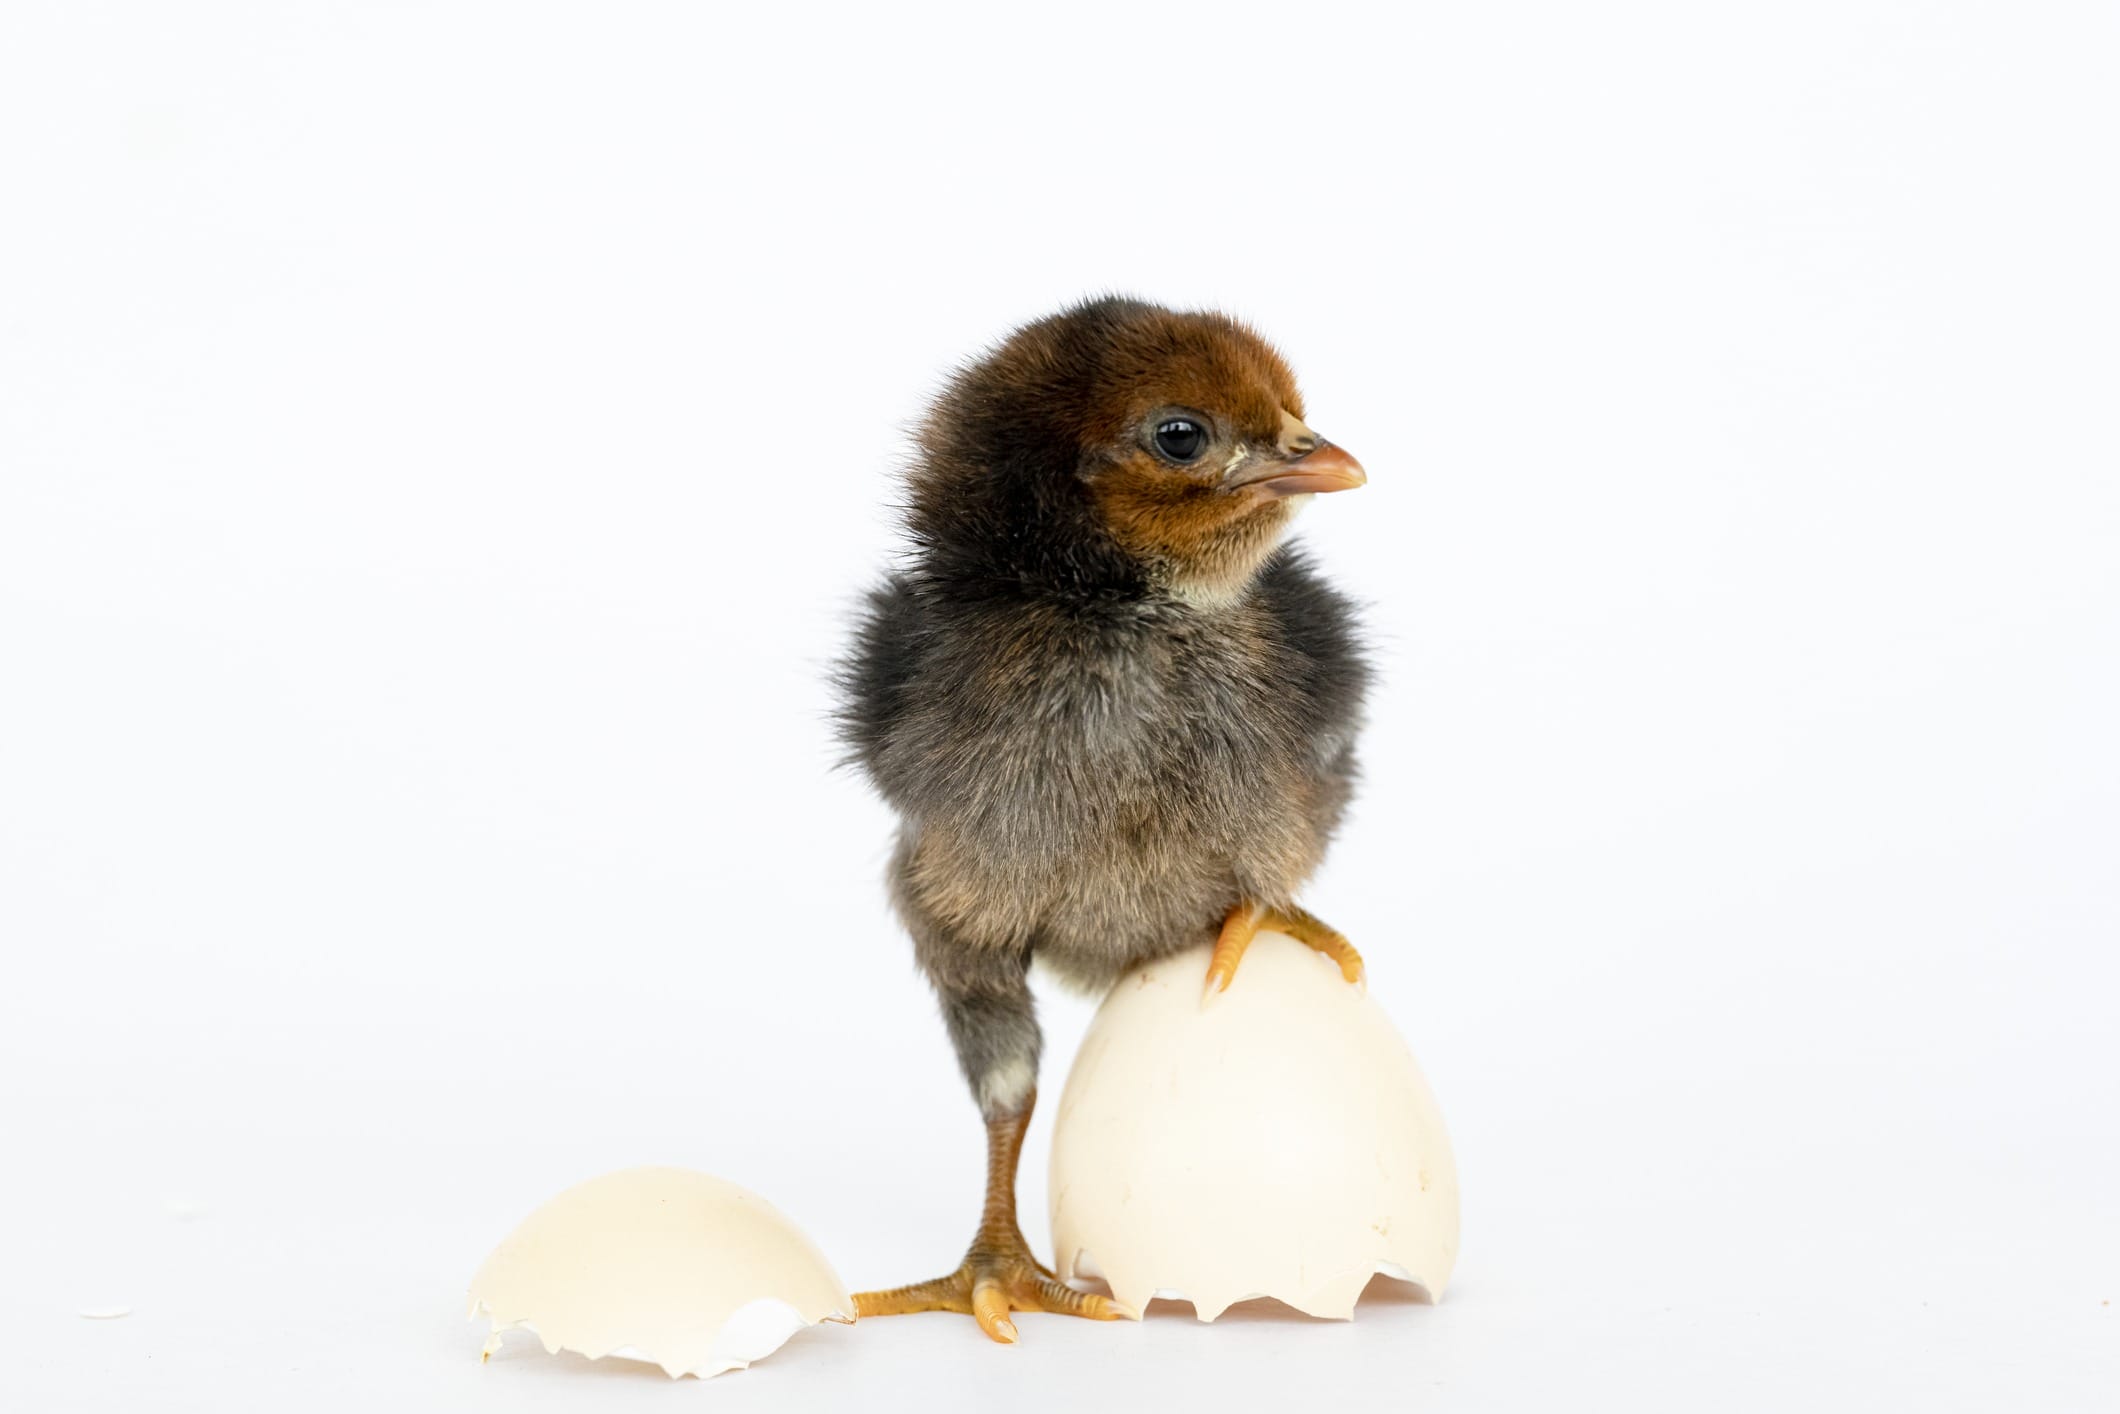 Baby Chick on Egg